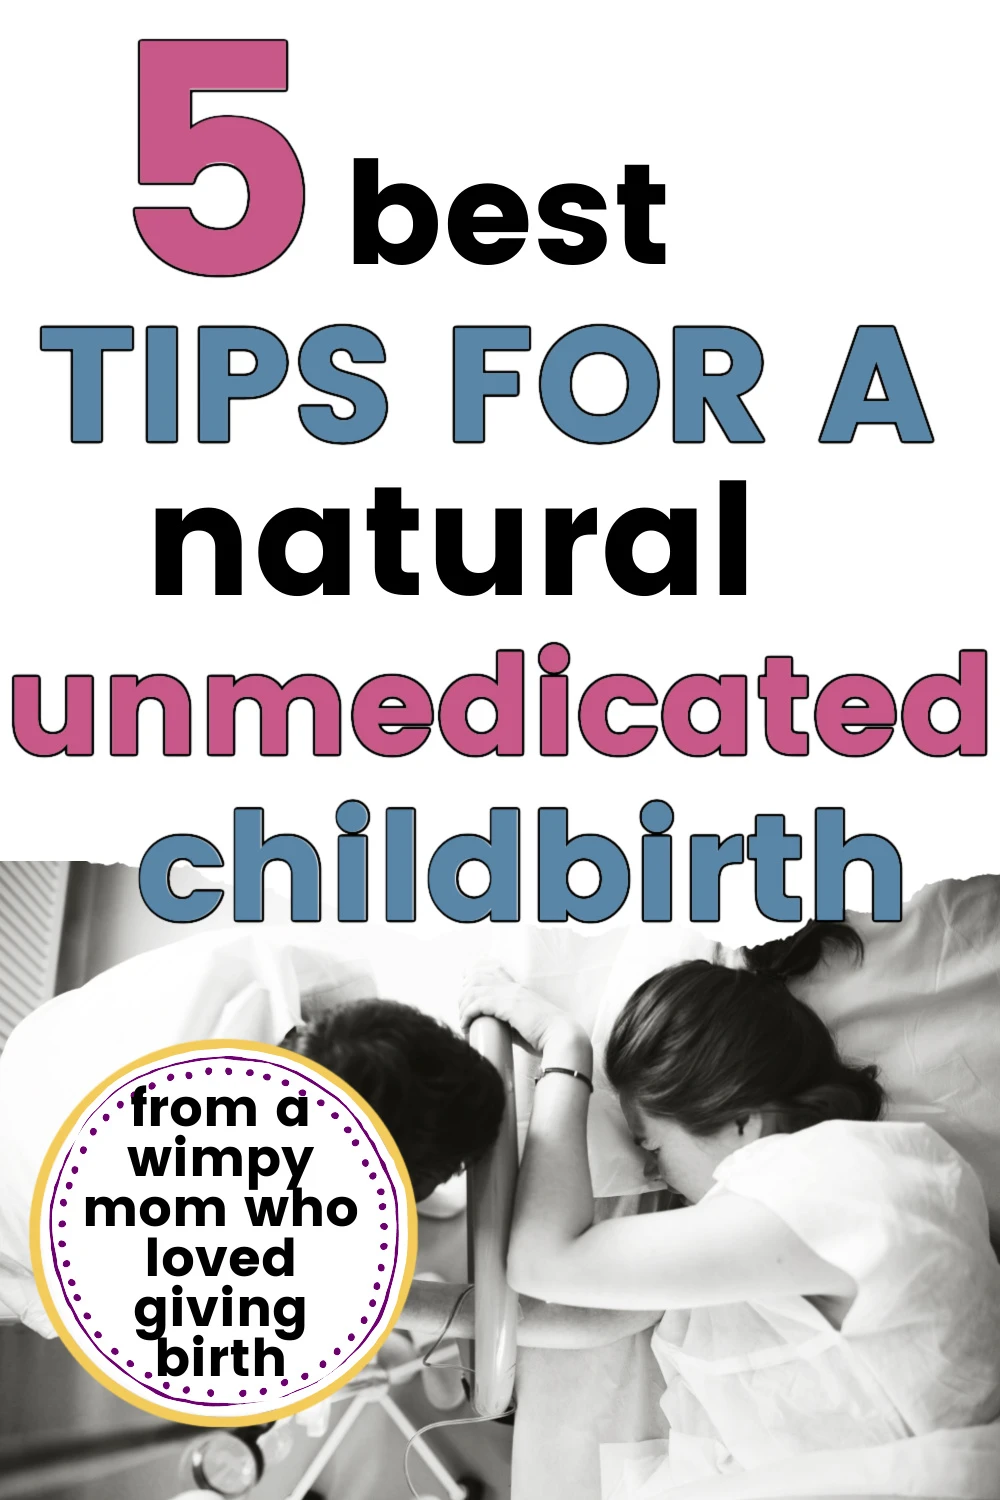 woman in pain during labor holding onto bed and her partner's hands, with text overlay, "5 best tips for a natural, unmedicated childbirth"